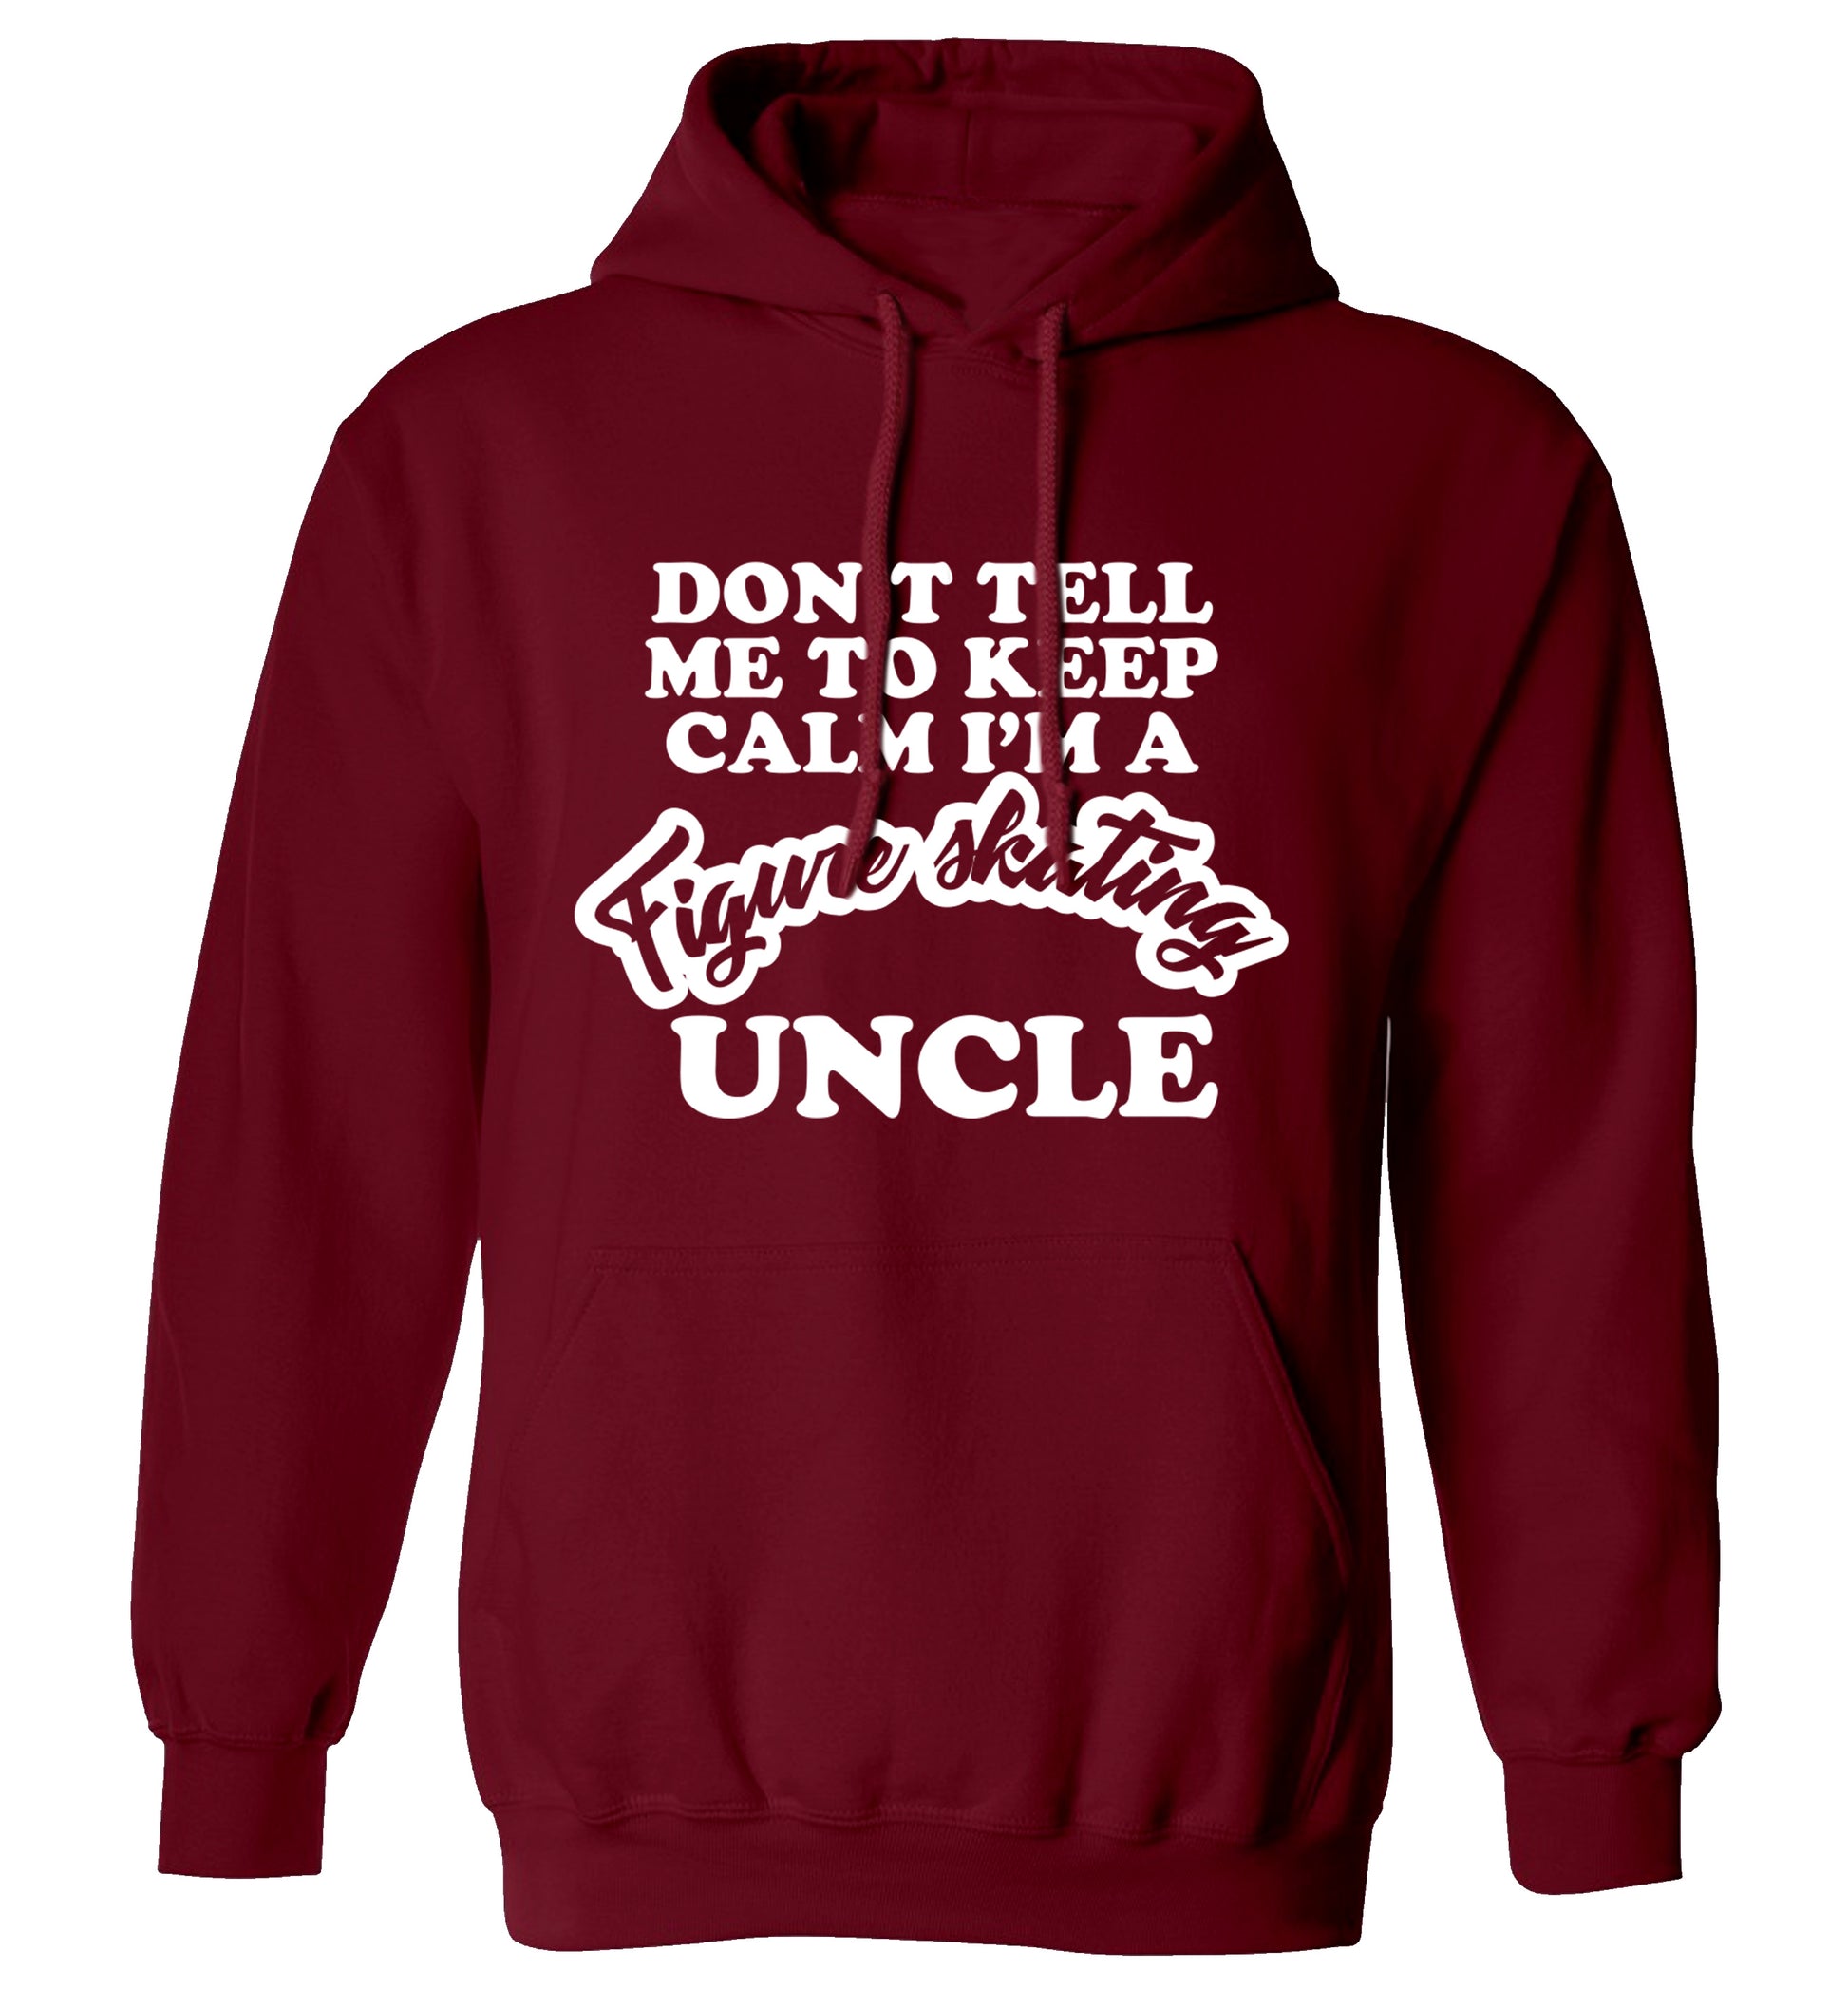 Don't tell me to keep calm I'm a figure skating uncle adults unisexmaroon hoodie 2XL